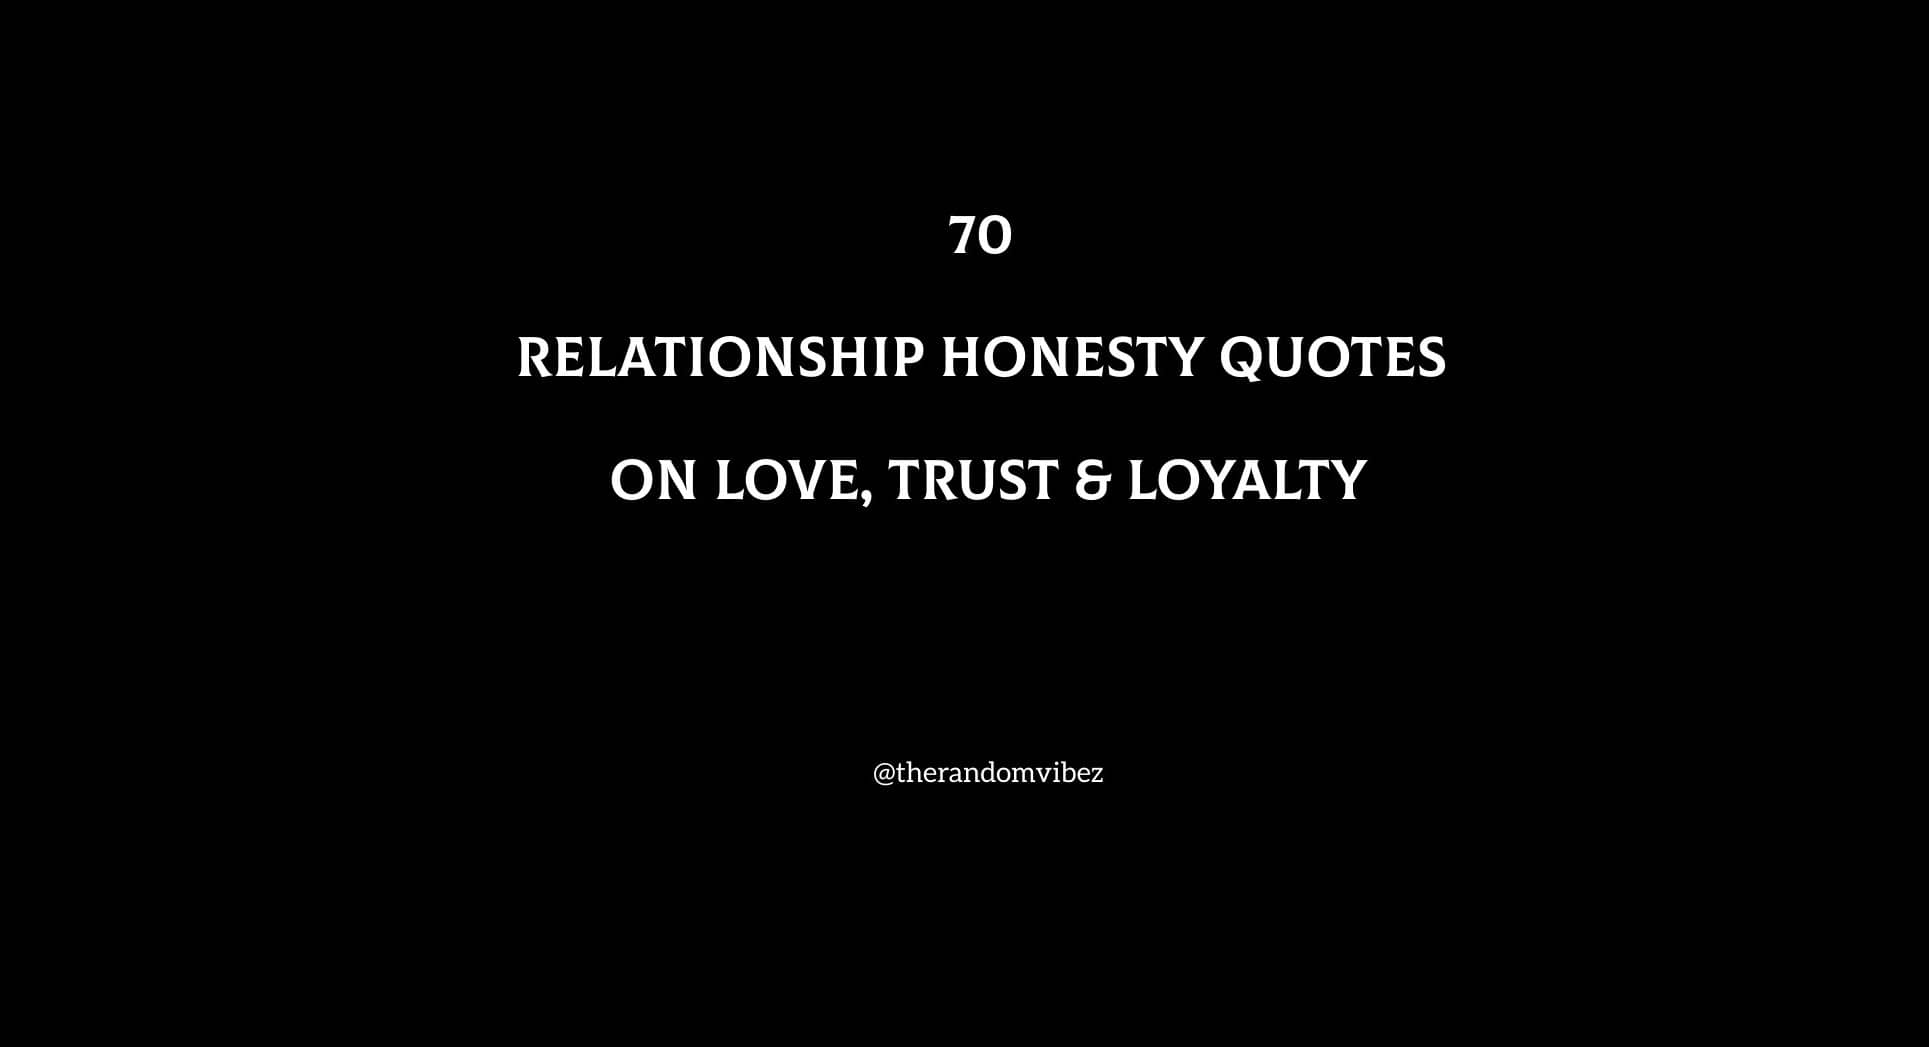 70 Relationship Honesty Quotes On Love, Trust & Loyalty